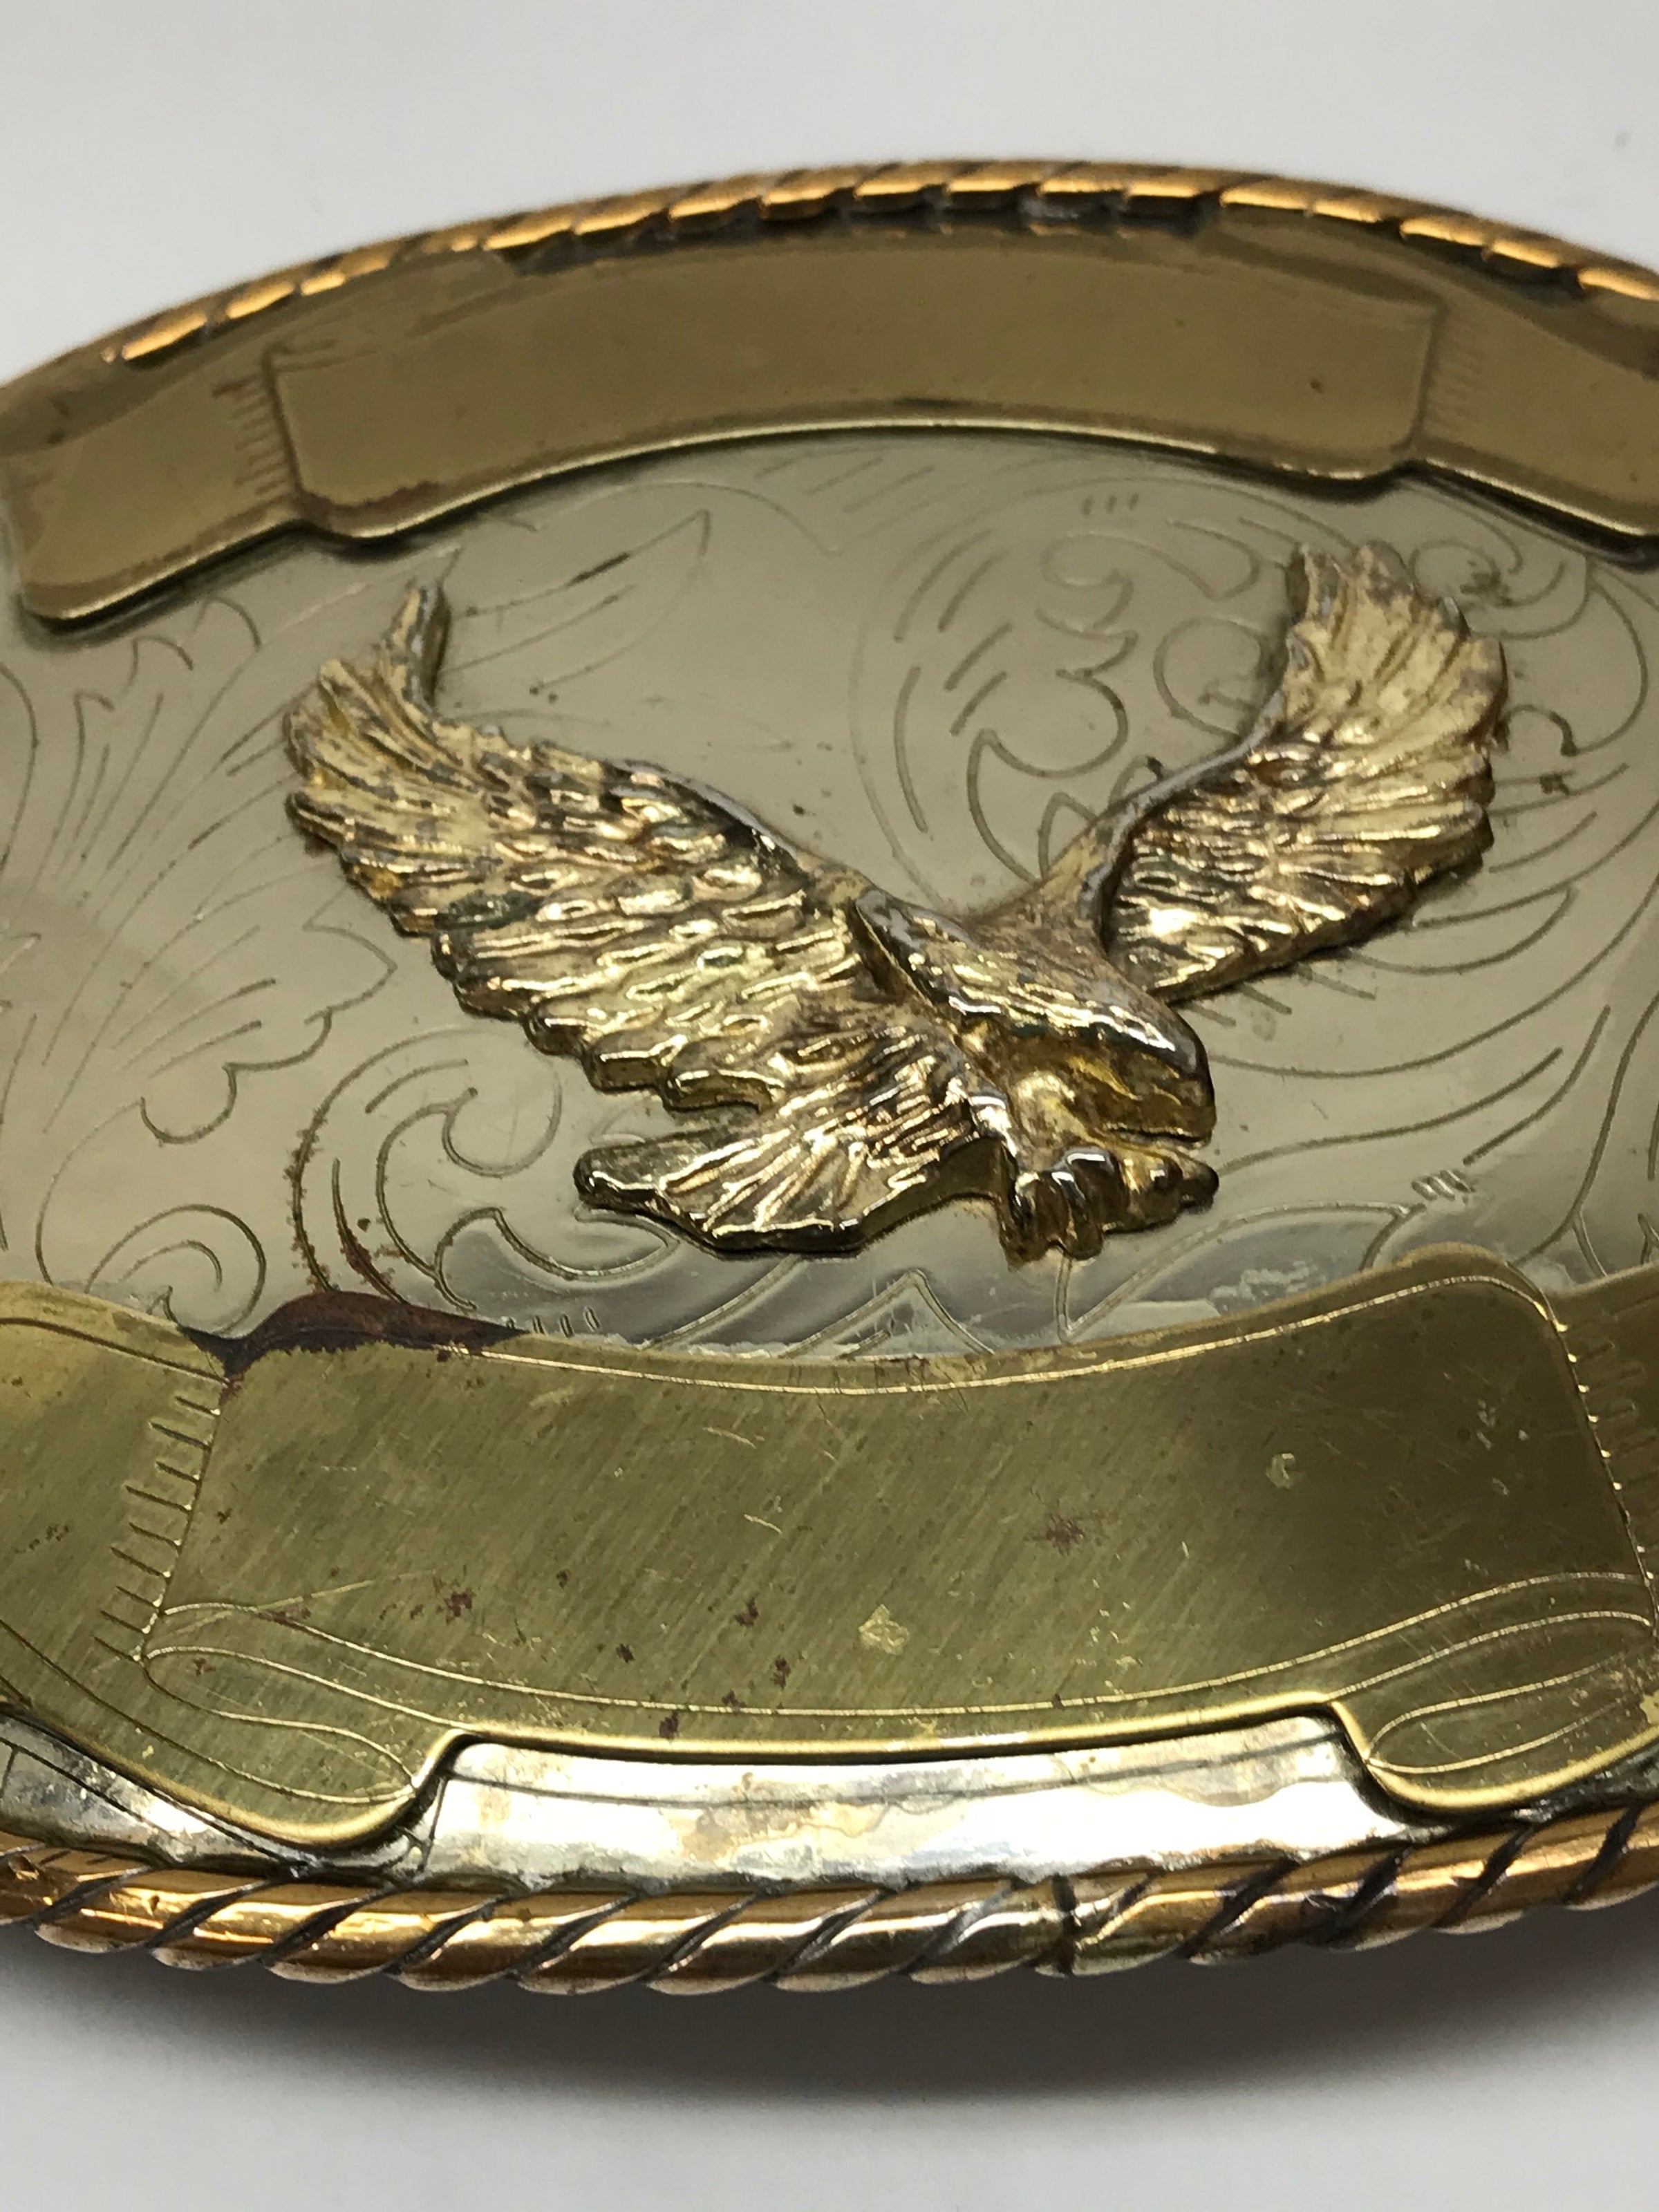 1988 Large Oval German Silver Eagle Belt Buckle – Hers and His